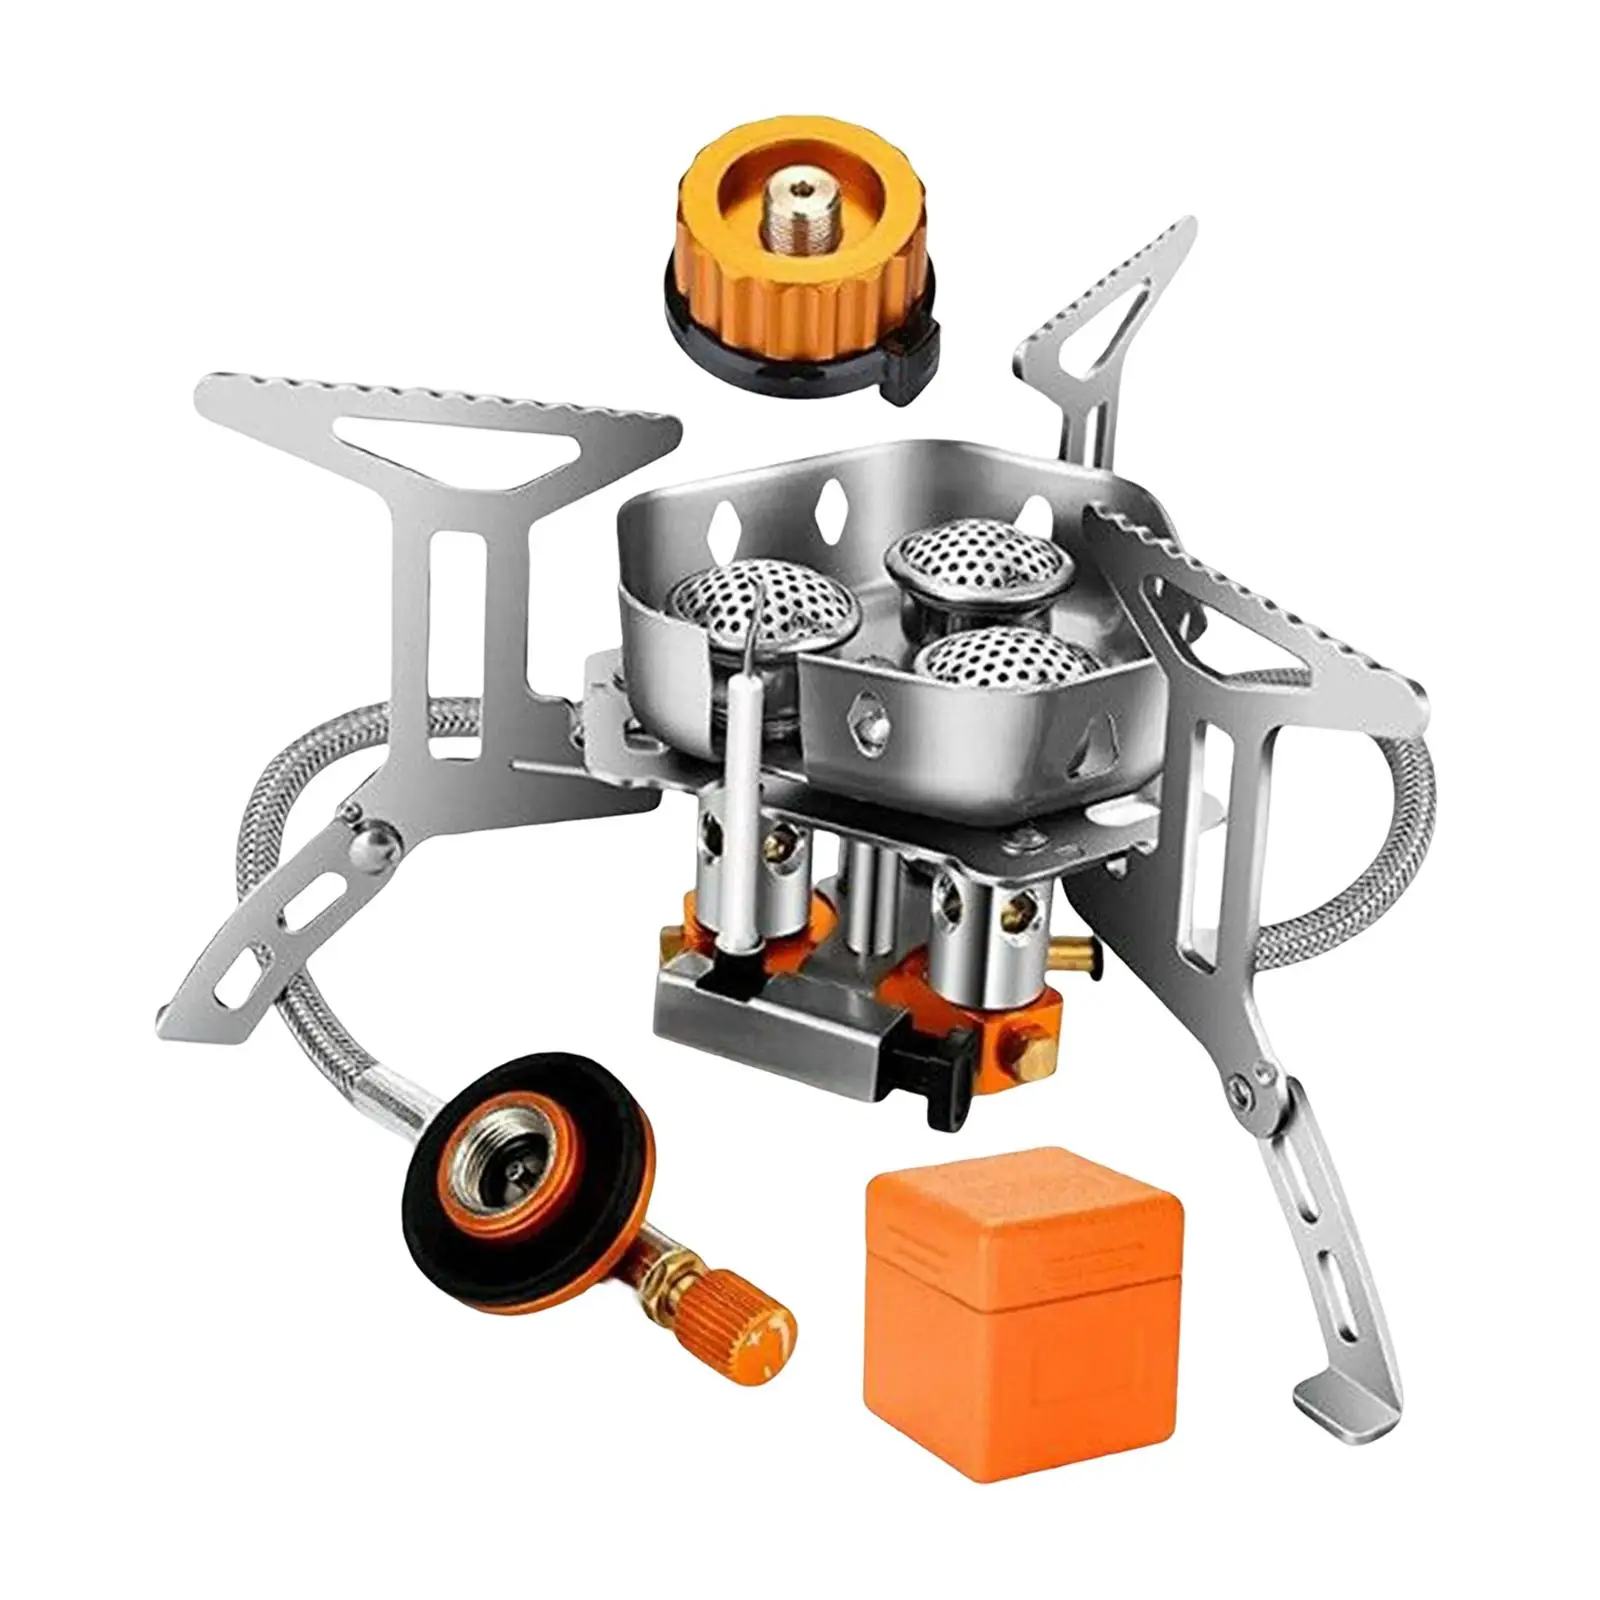 Portable Camping Gas Stove Split Burner Gadgets Gear Windproof Survival Kit Collapsible Camp Stove for Outdoor Hiking BBQ Travel